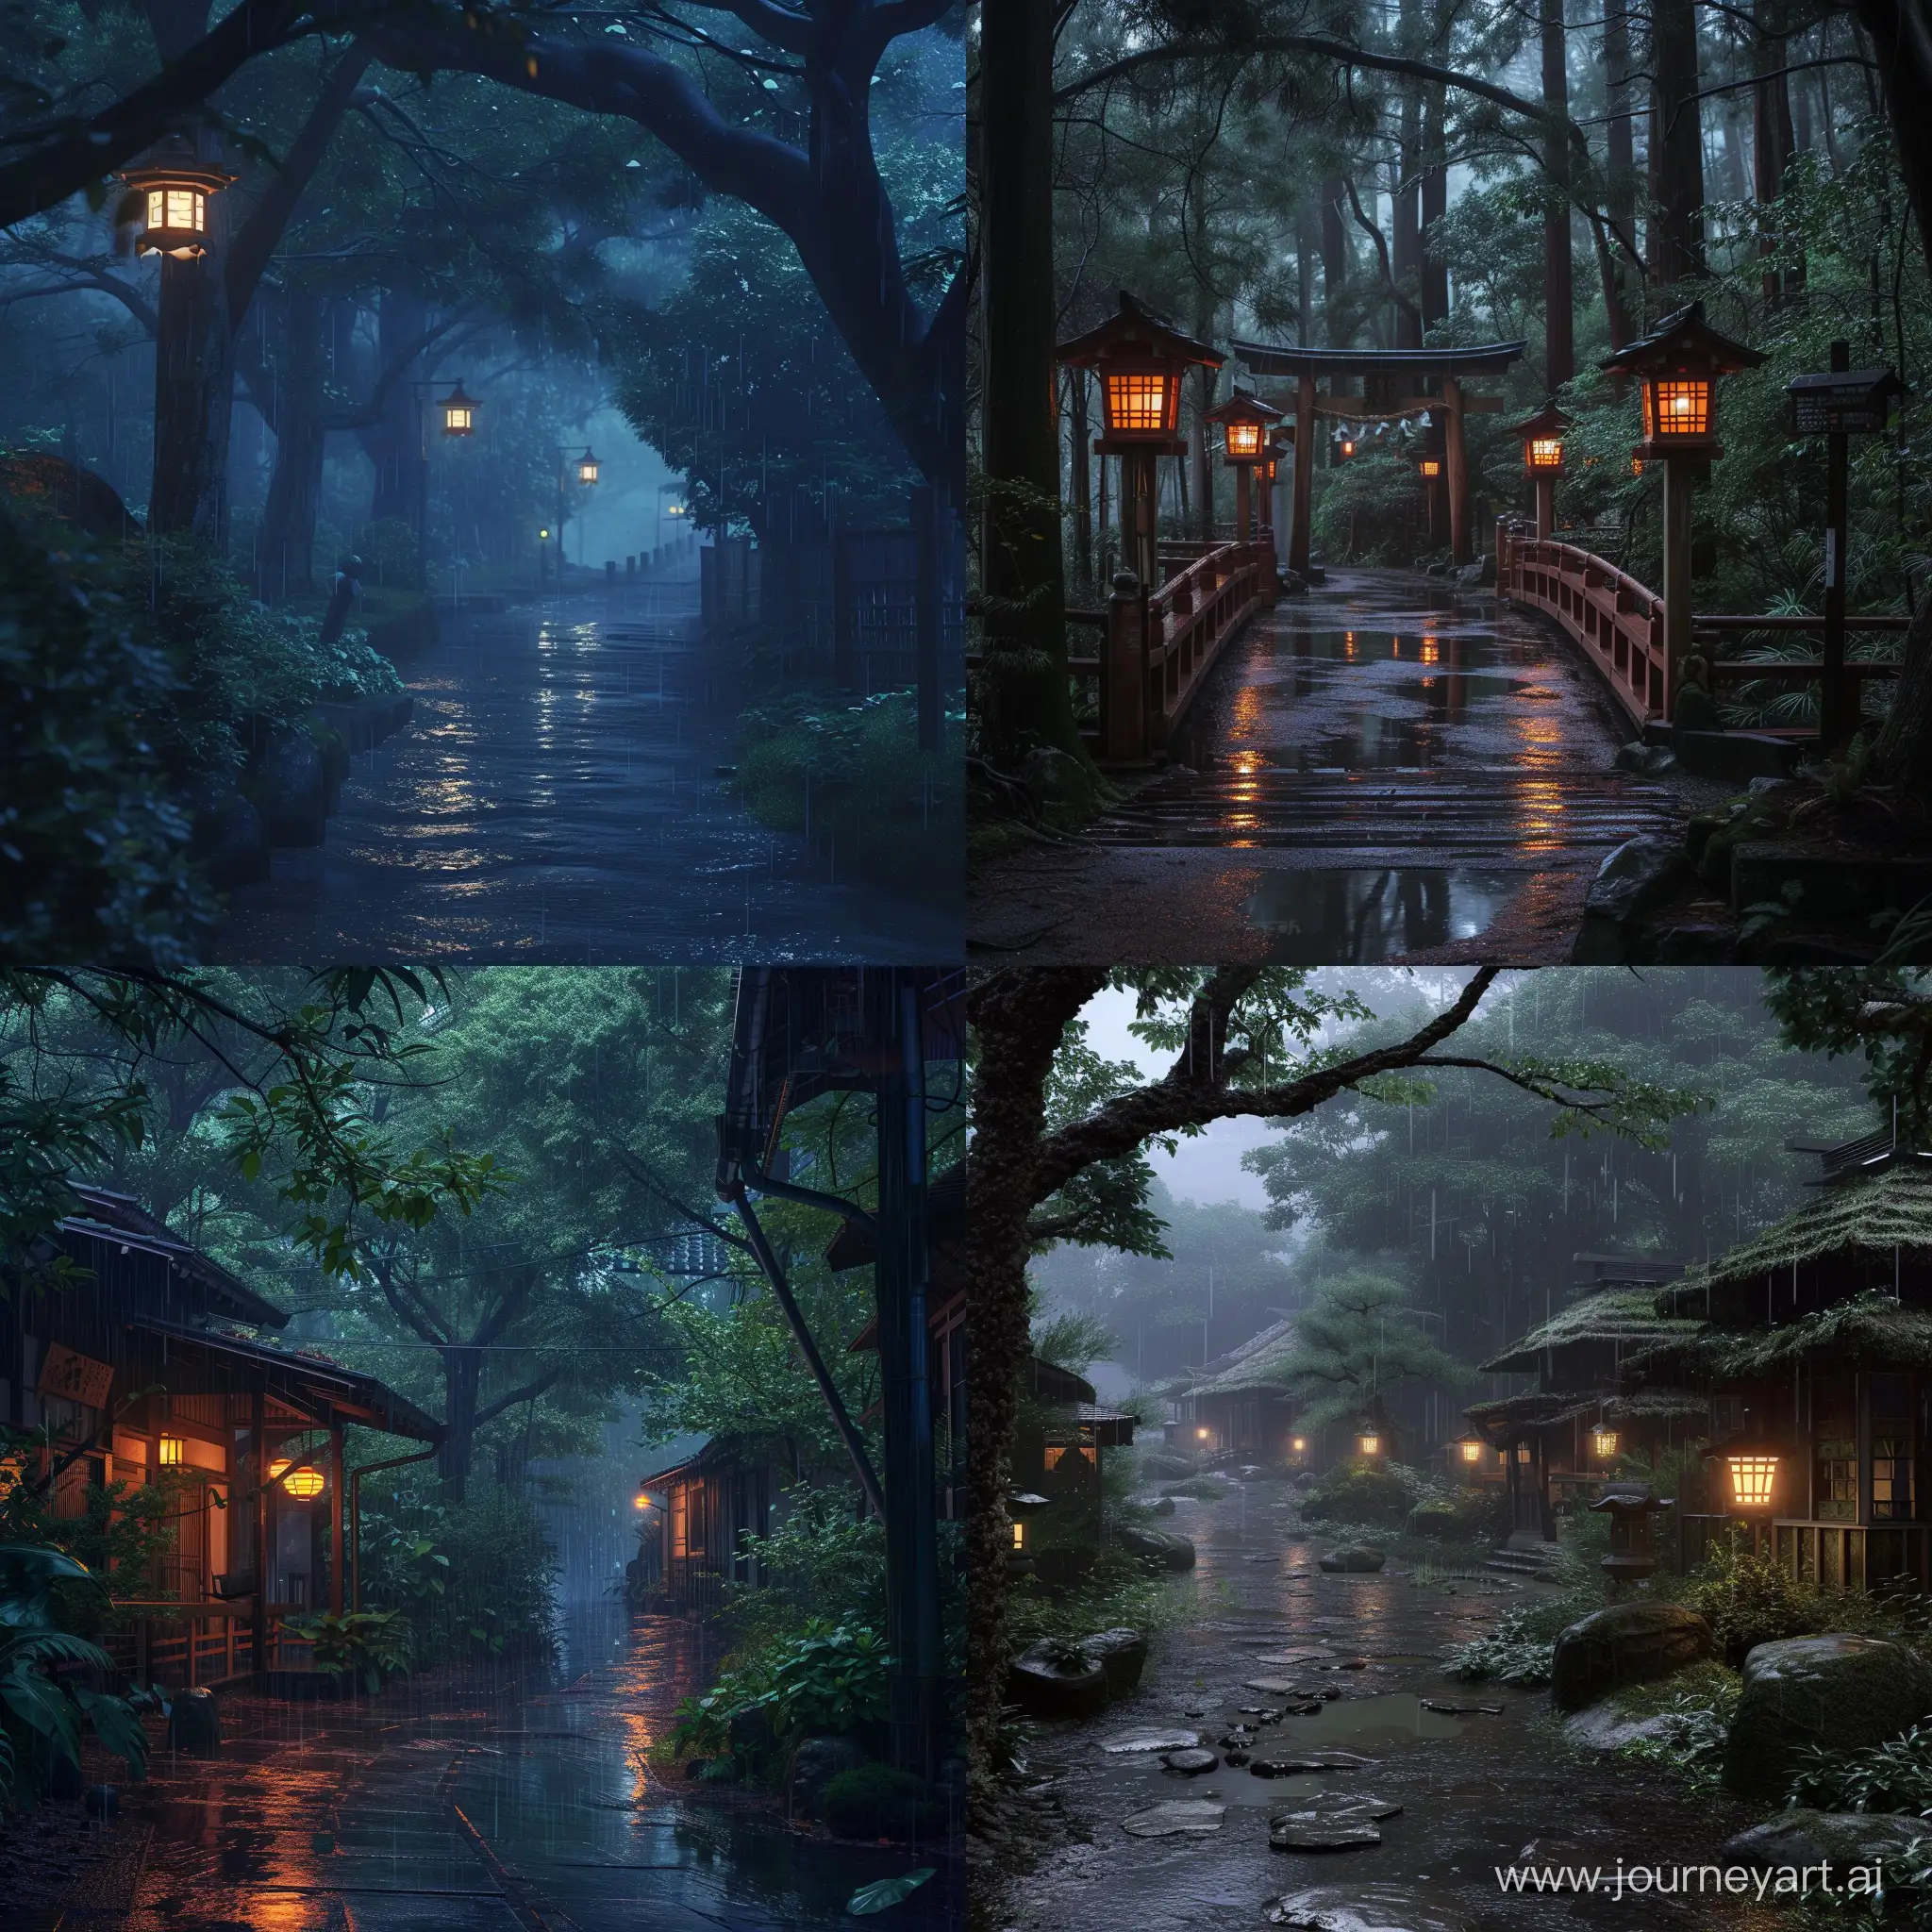 Enchanting-Night-Scene-in-a-Rainy-Japanese-Forest